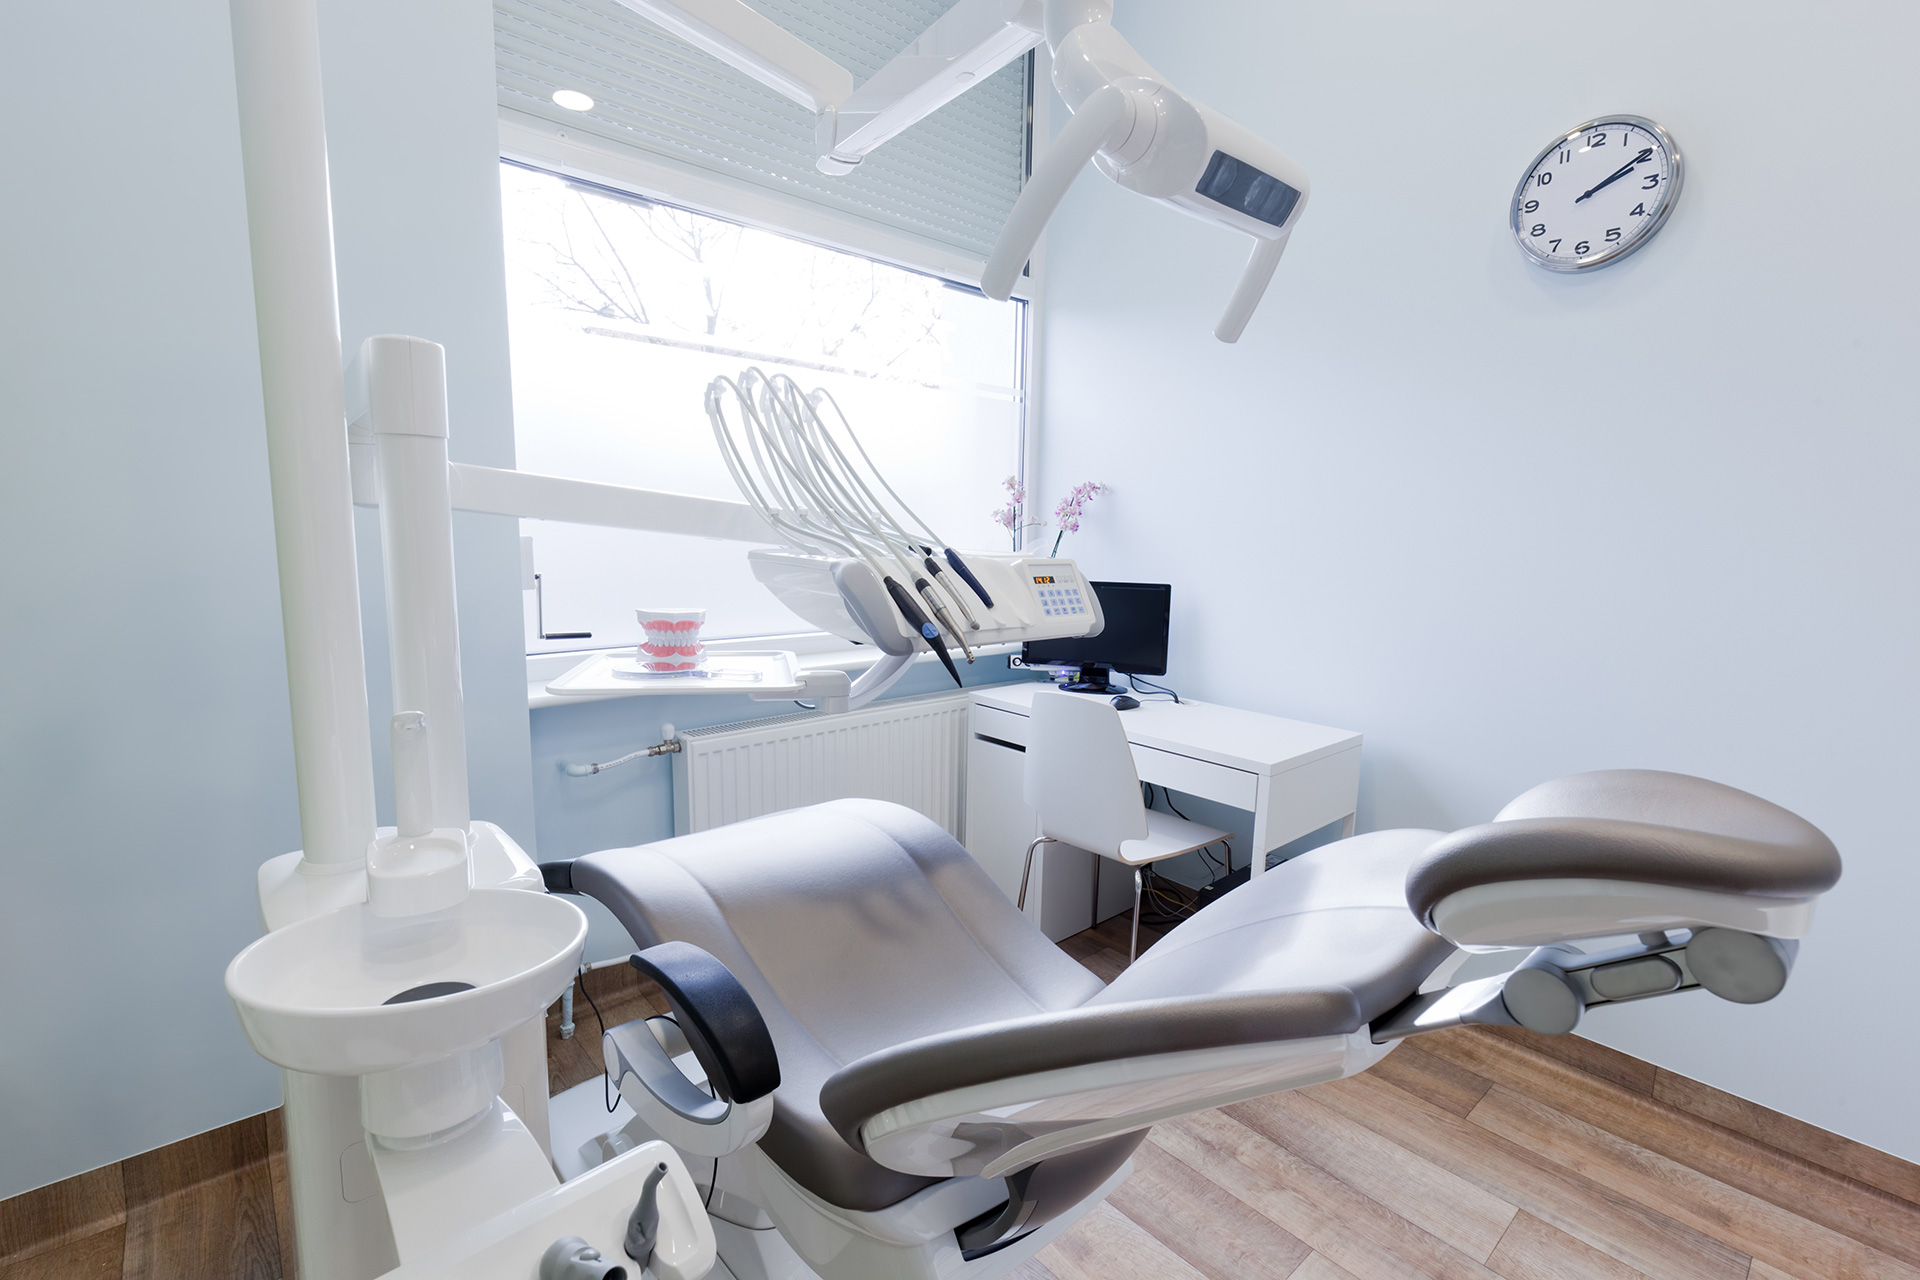 An image of a modern dental office interior with a large dental chair and equipment, set against a blue wall.